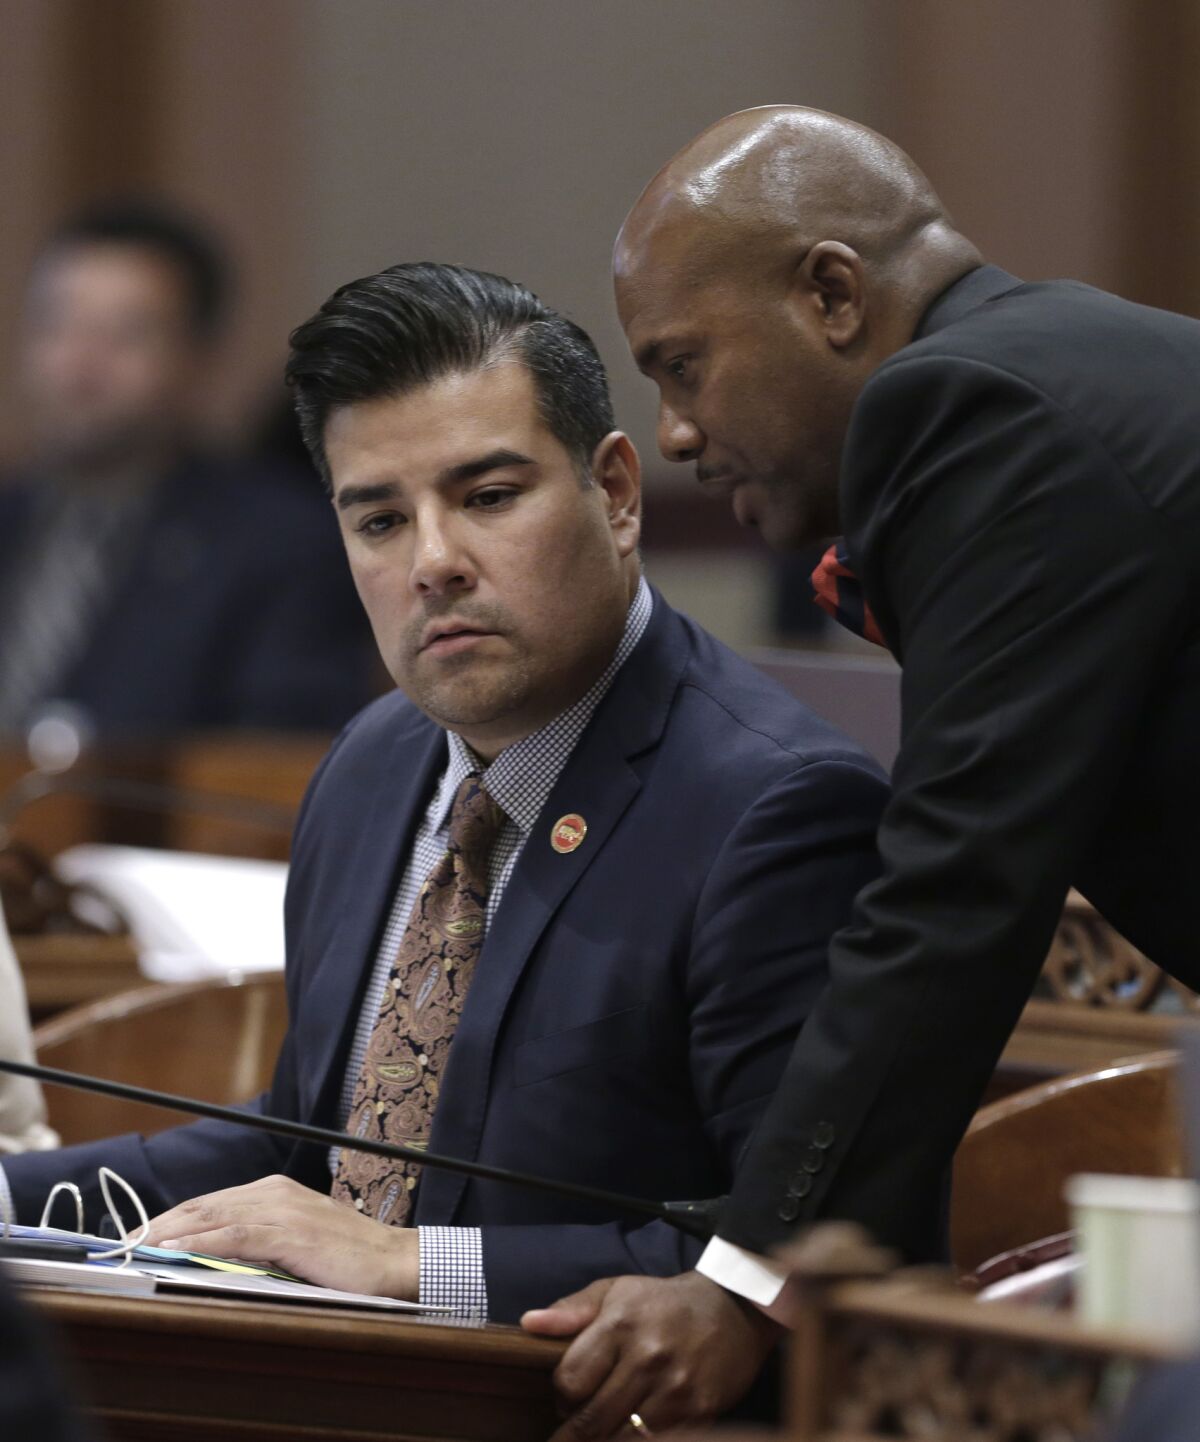 File photo of California Insurance Commissioner Ricardo Lara, seated. A consumer group called for a criminal probe into his fundraising practices.